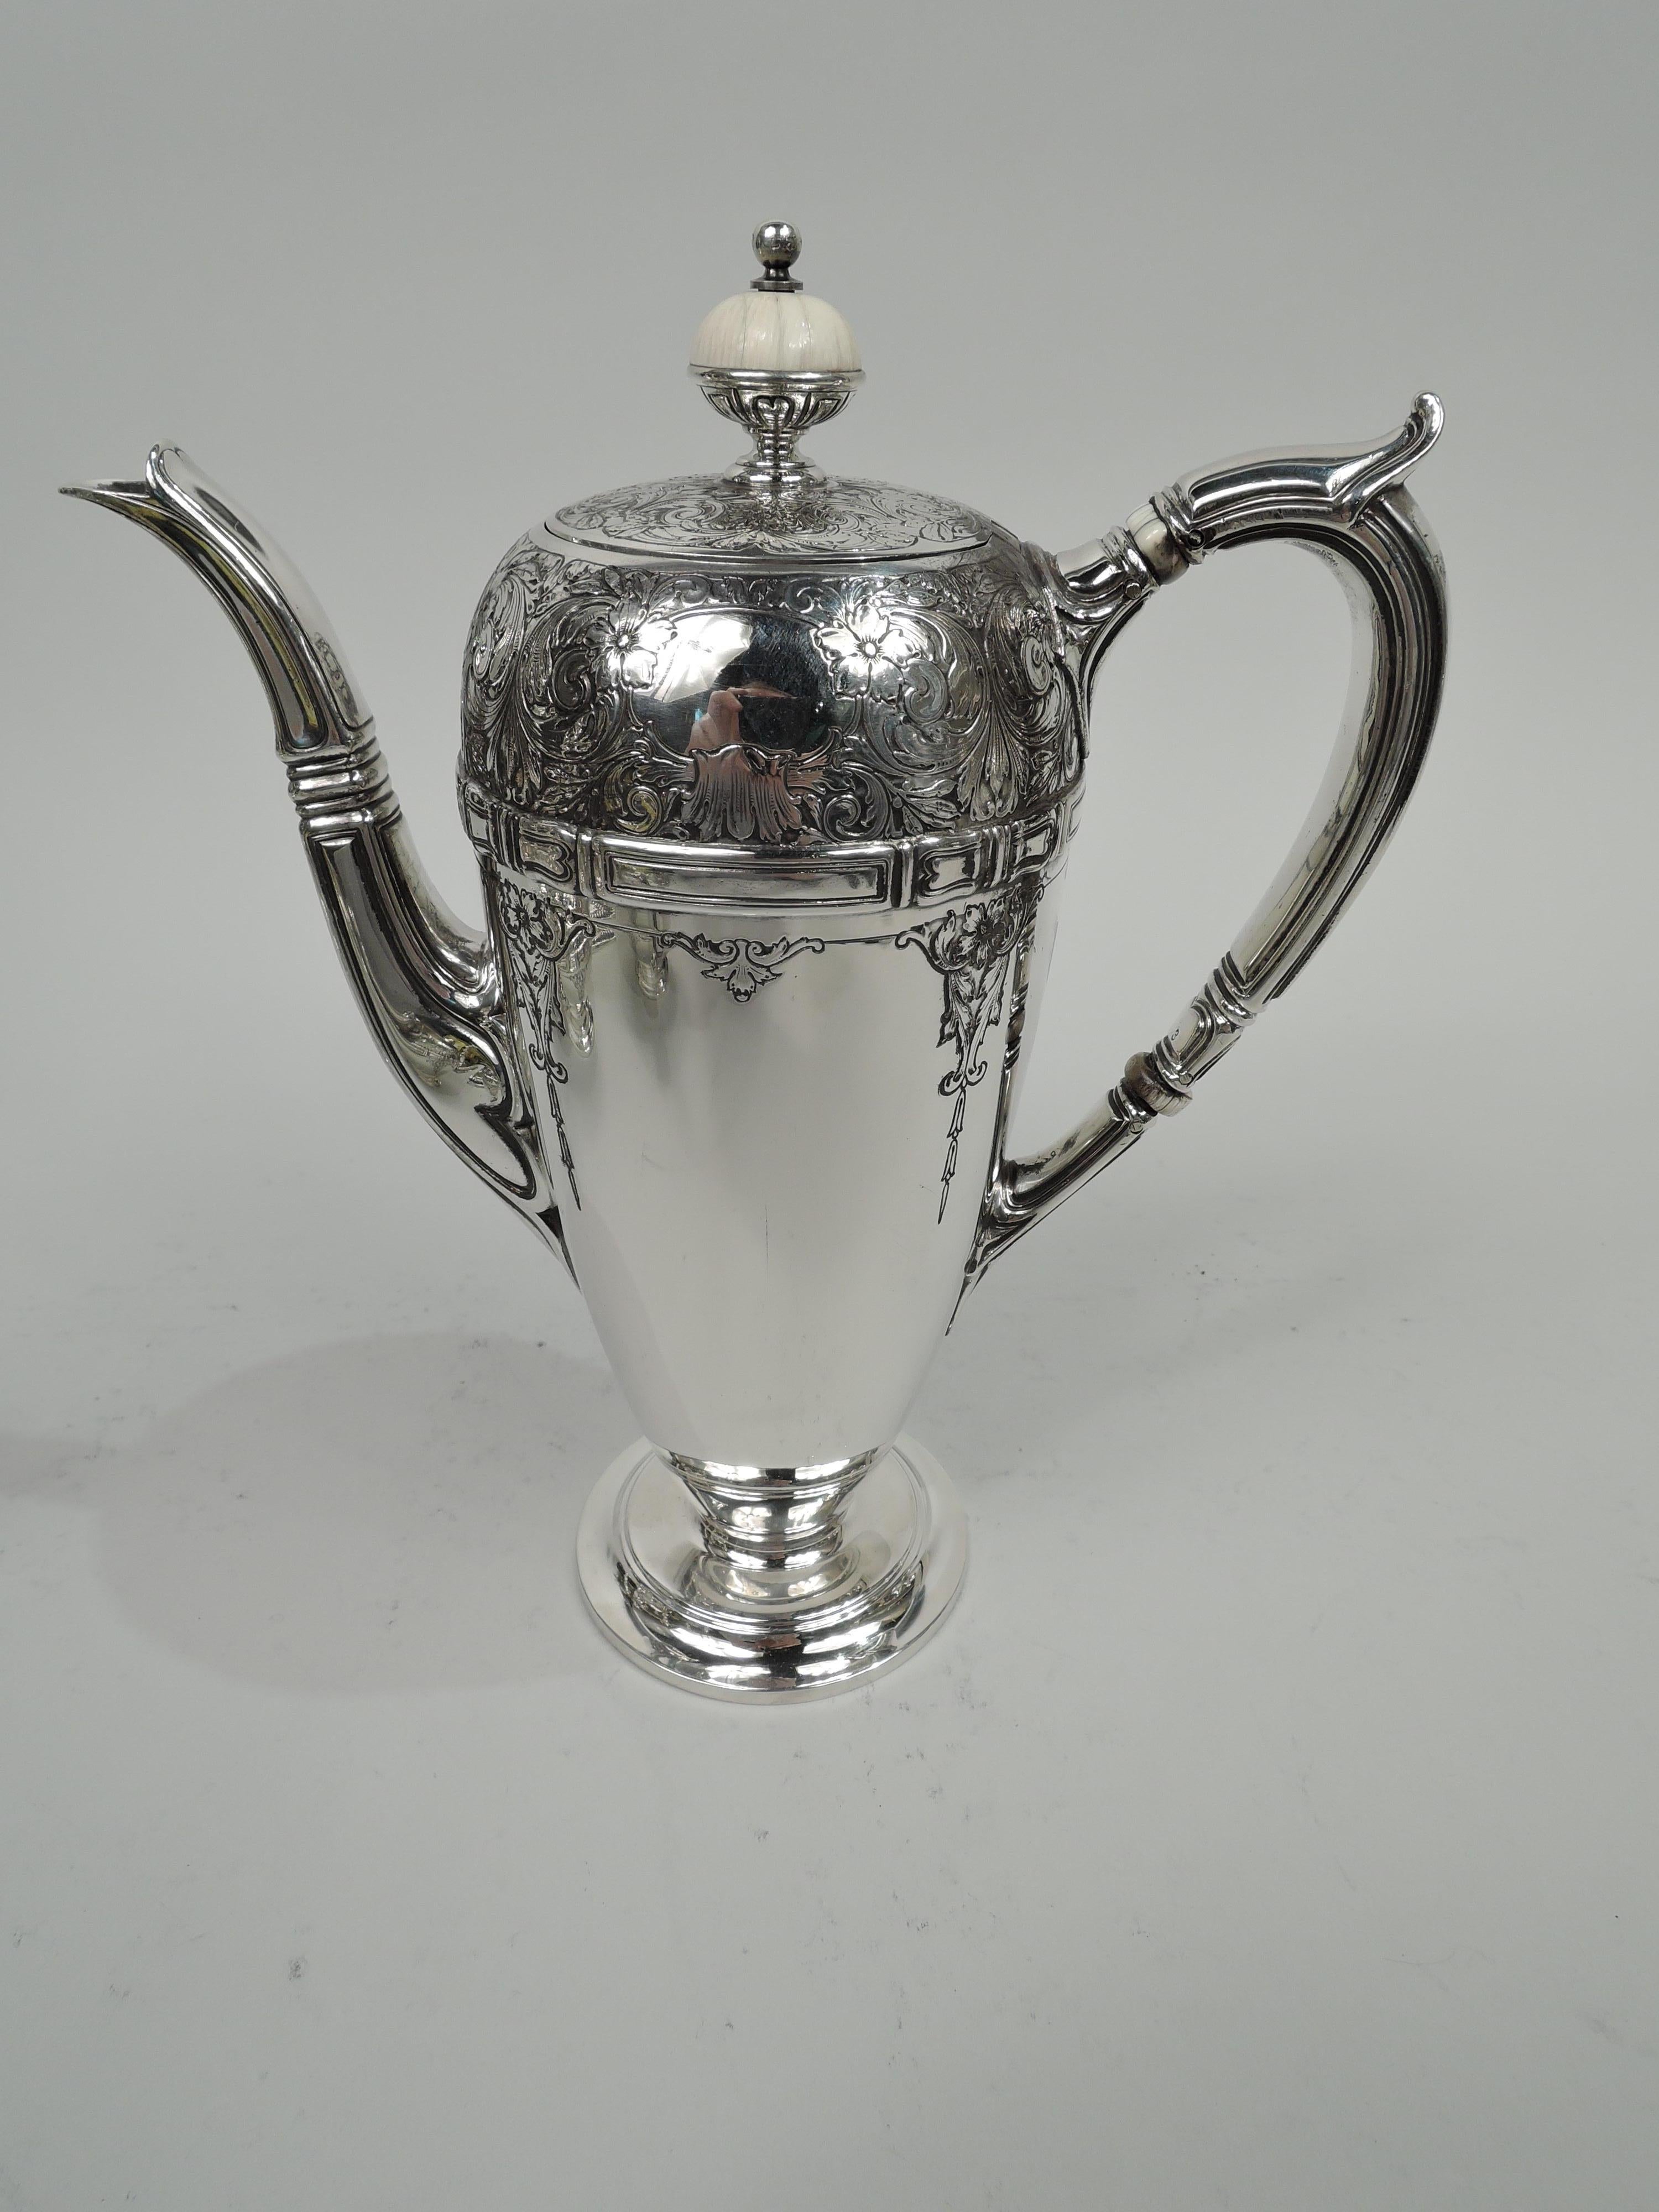 Edwardian sterling silver 3-piece coffee set. Made by Gorham in Providence, ca 1917-8. This set comprises coffeepot, creamer, and sugar. Coffeepot has tapering ovoid body with flush and hinged cover and s-spout with tooled curvilinear frames and